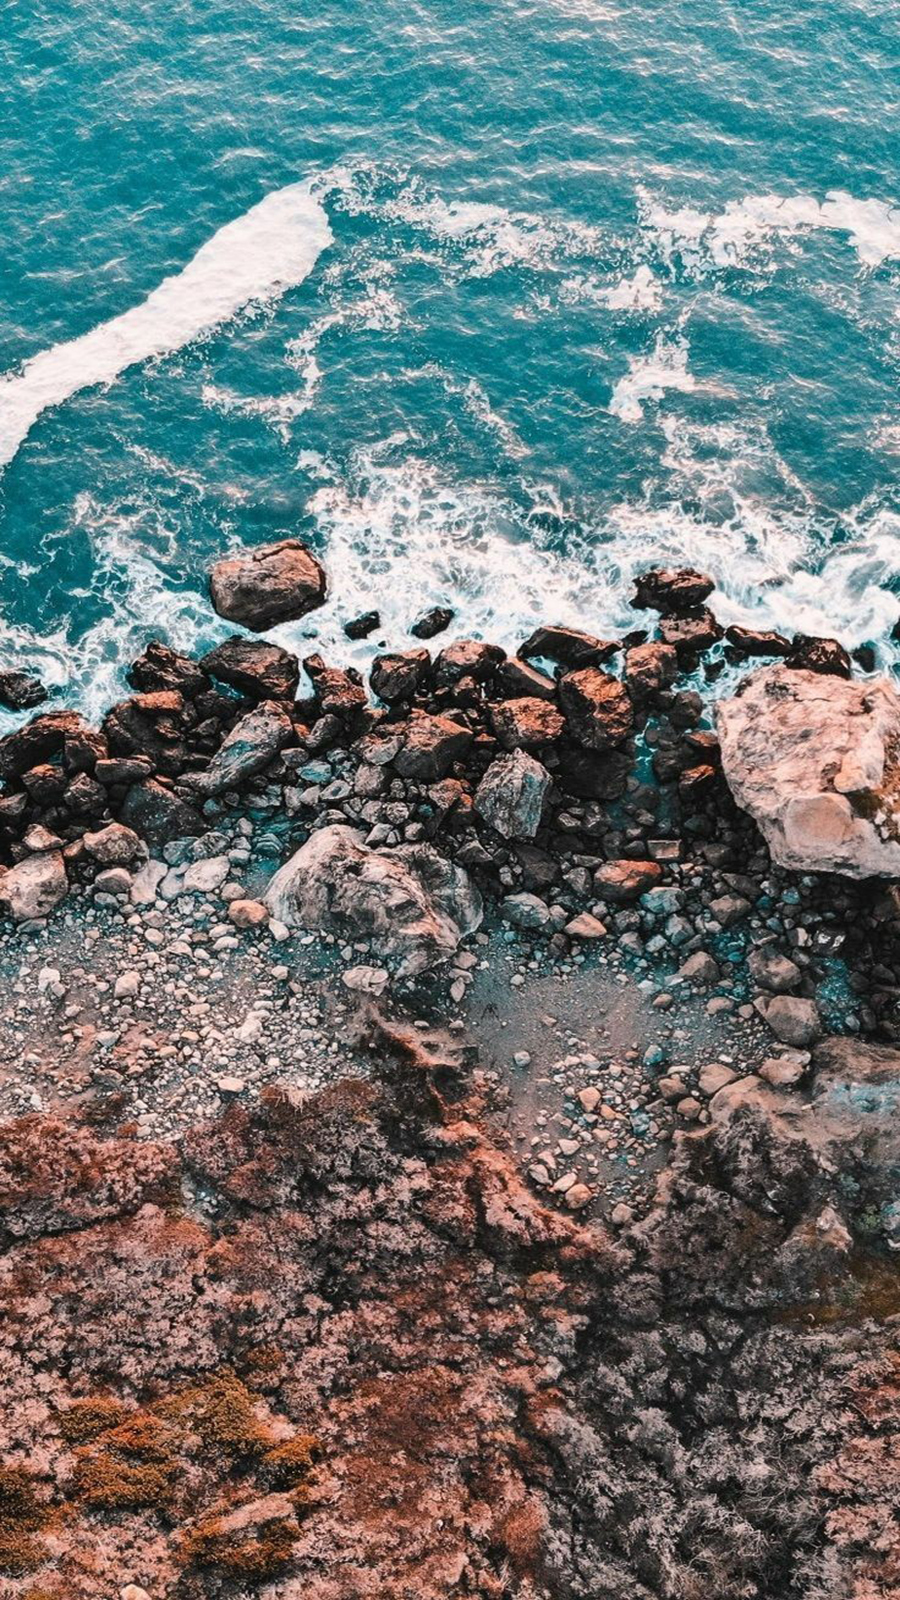 A rocky shore with waves crashing against it - Calming